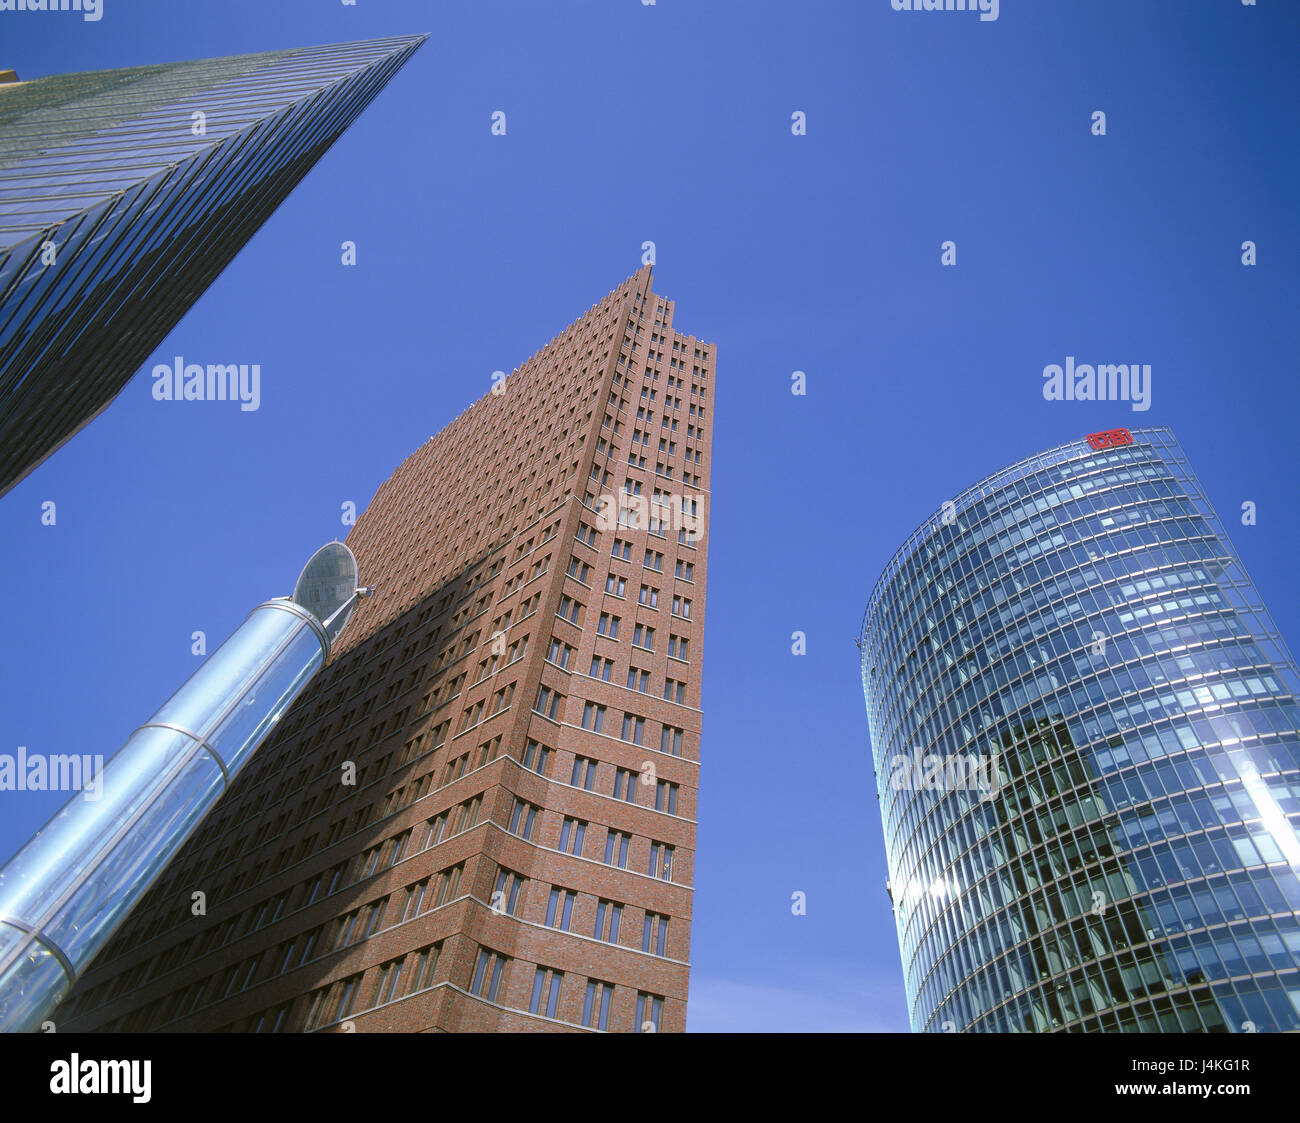 Germany, Berlin, Potsdam square, office building, Kollhoff tower, German Railways Tower, detail Europe, town, city, capital, part of town, architect from the left: Renzo Piano, Hans Kollhoff, Helmut Jahn, office building, high rises, architecture, building Stock Photo